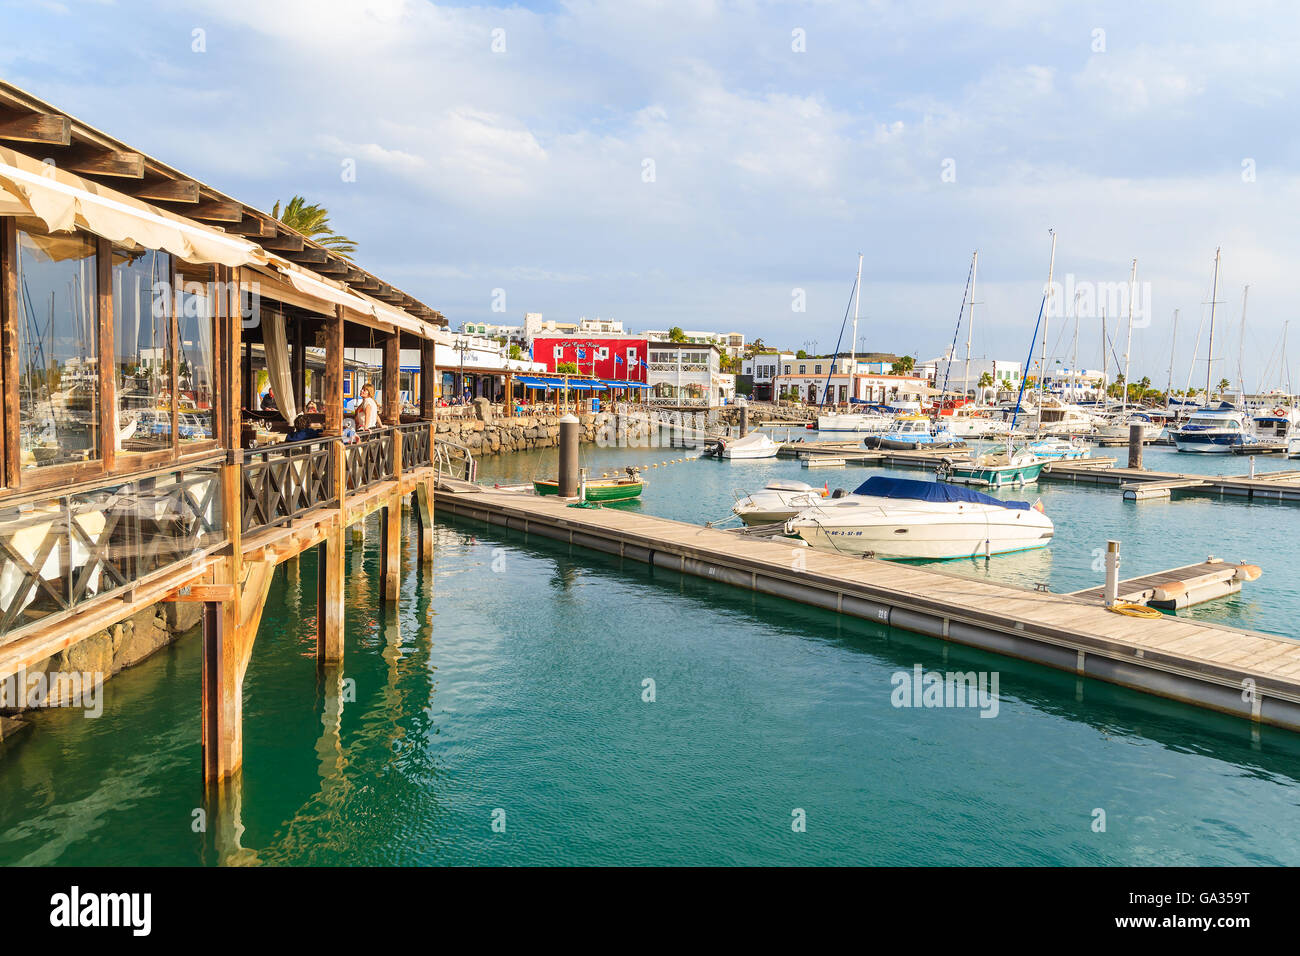 MARINA RUBICON, LANZAROTE ISLAND - JAN 11, 2015: restaurant and pier in Rubicon port, Playa Blanca town. Canary Islands are popular holiday destination due to sunny tropical climate. Stock Photo